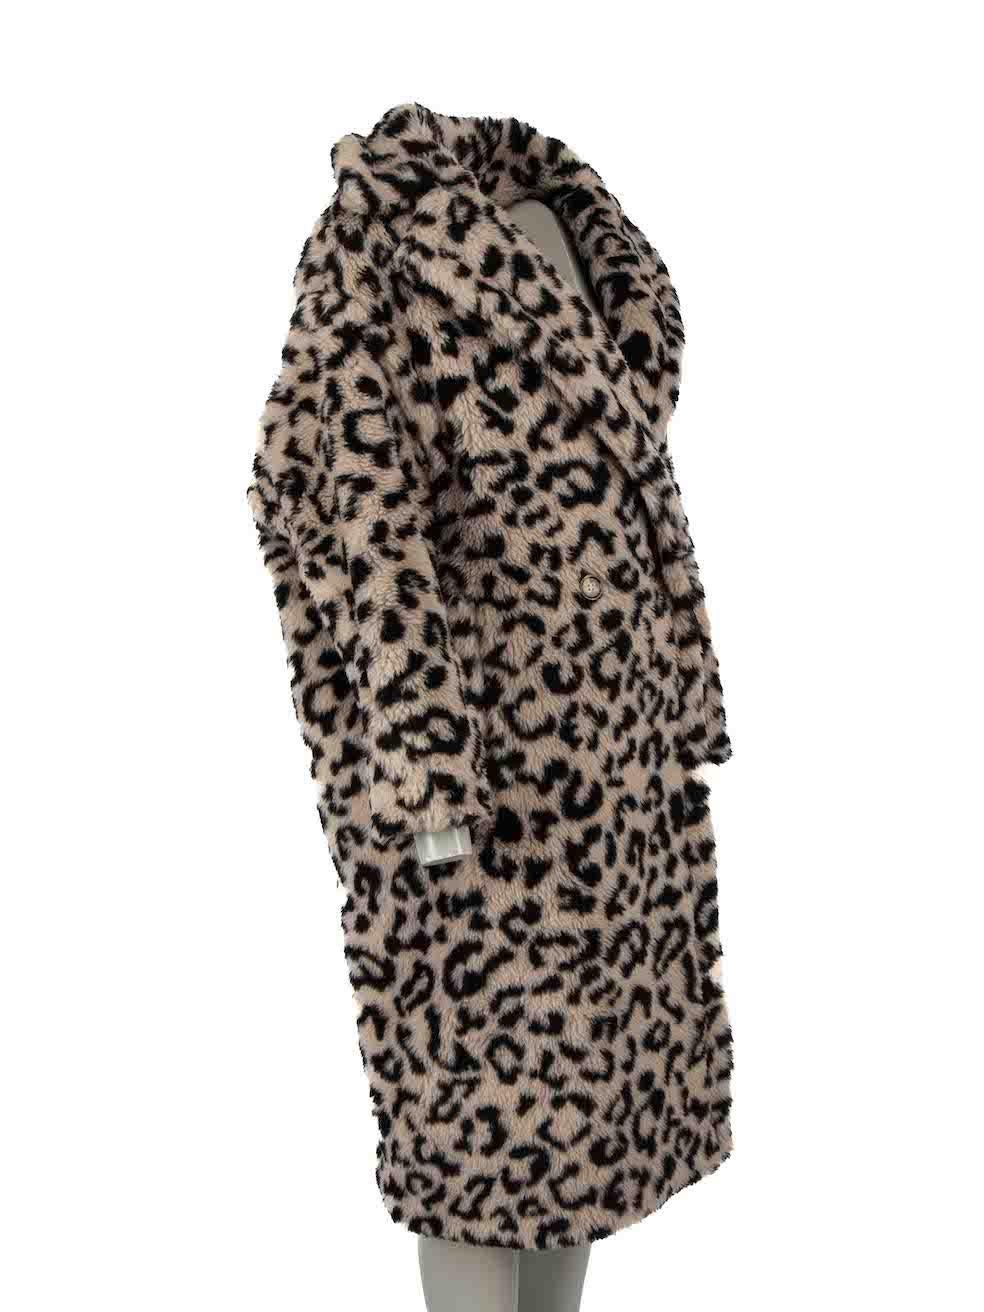 CONDITION is Very good. Hardly any visible wear to coat is evident on this used Max Mara designer resale item. This item comes with original garment bag and hanger.
  
Details 
Taupe 
Wool 
Coat 
Leopard print
Oversized fit
Button up